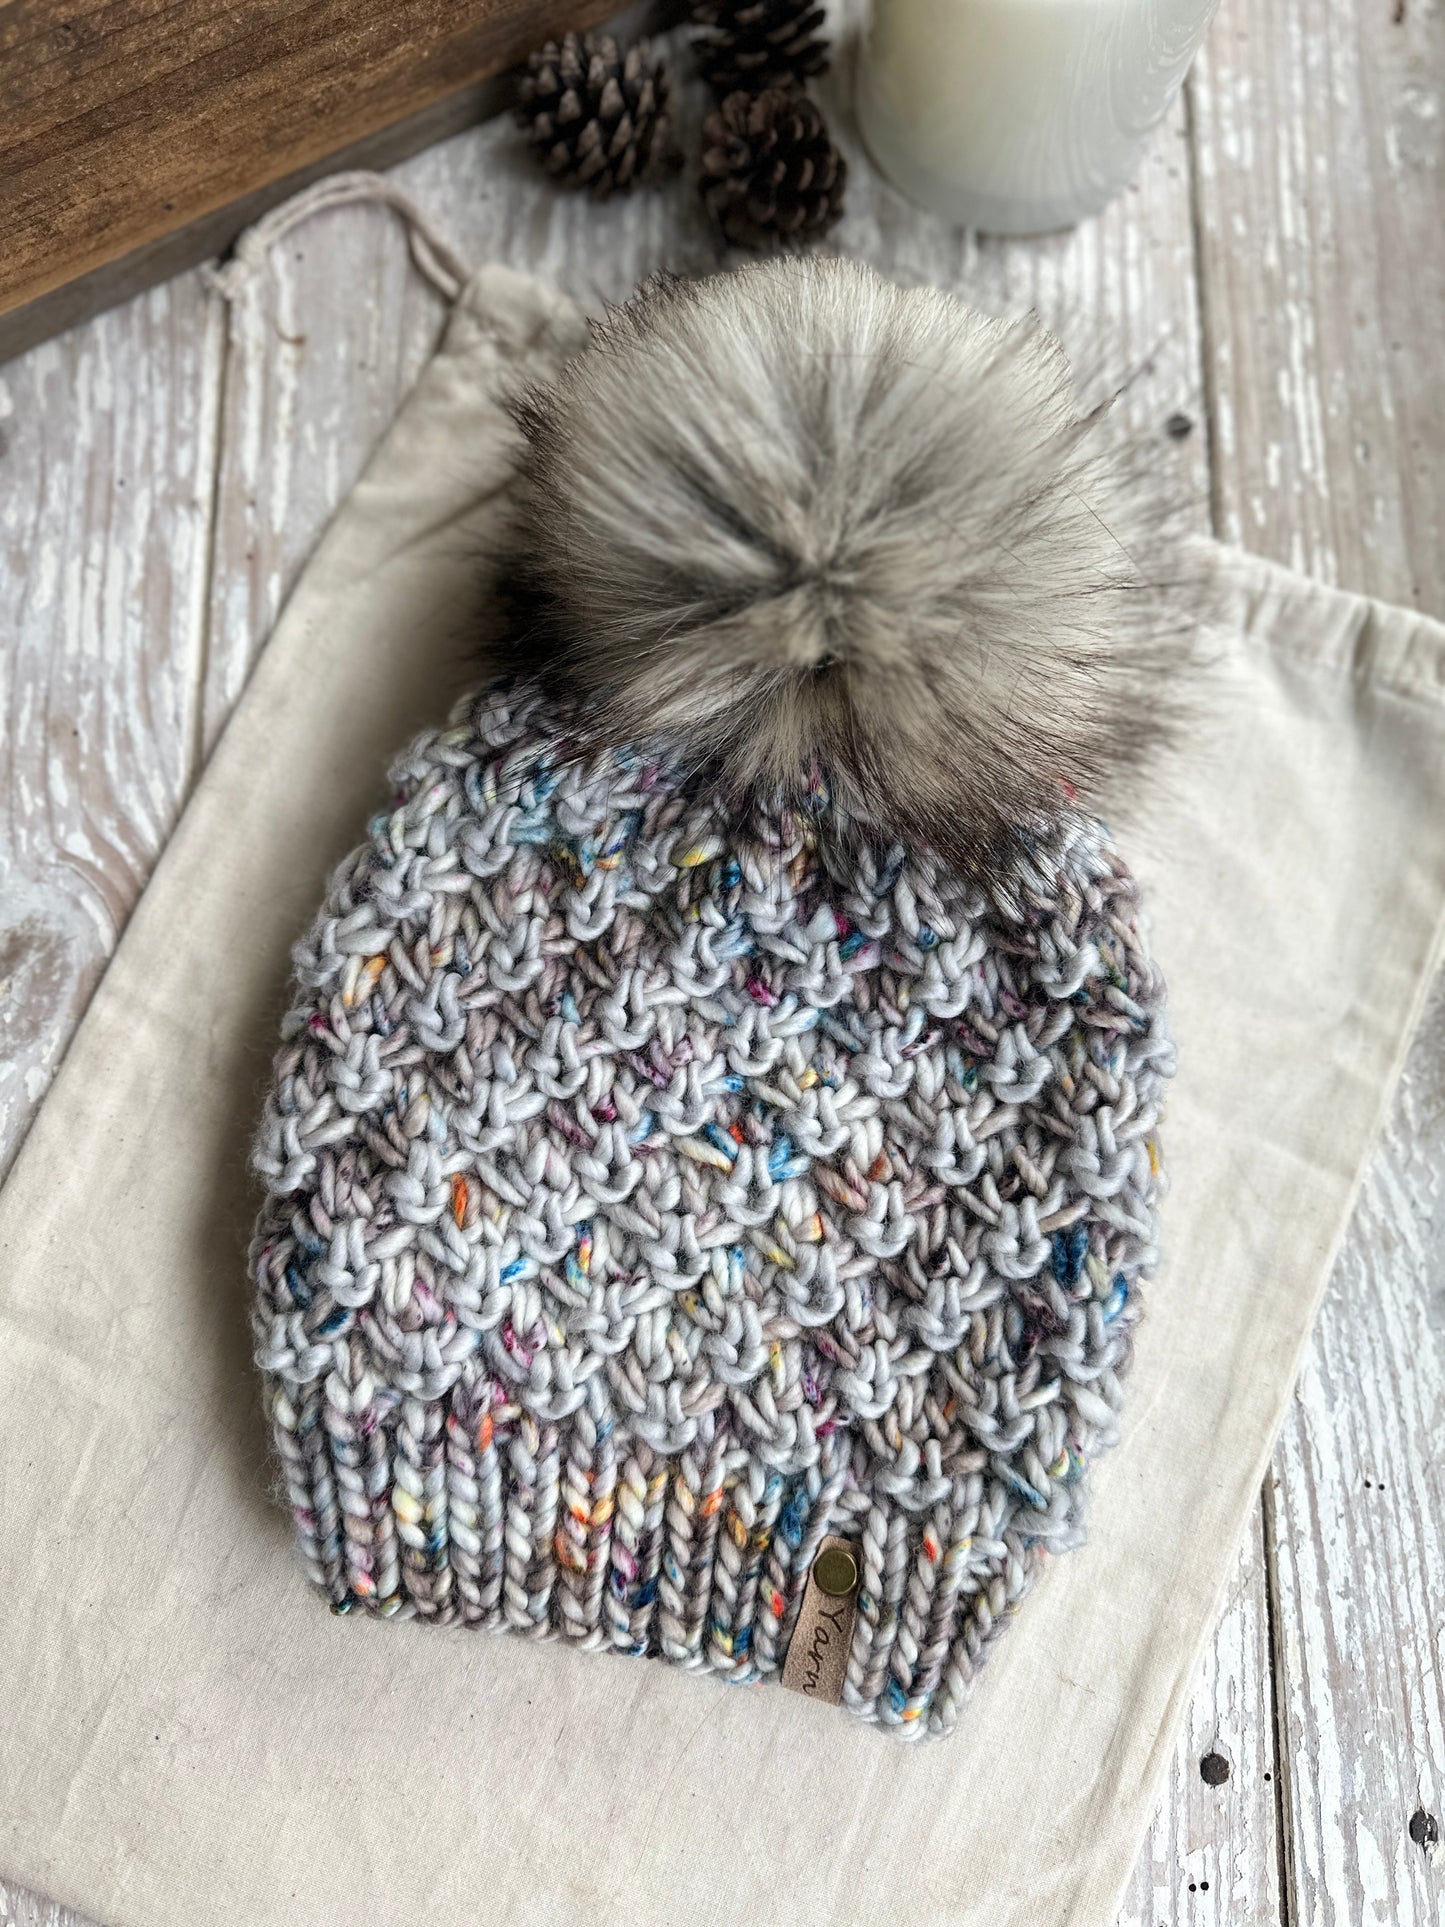 Merino wool knit hat and cowl set